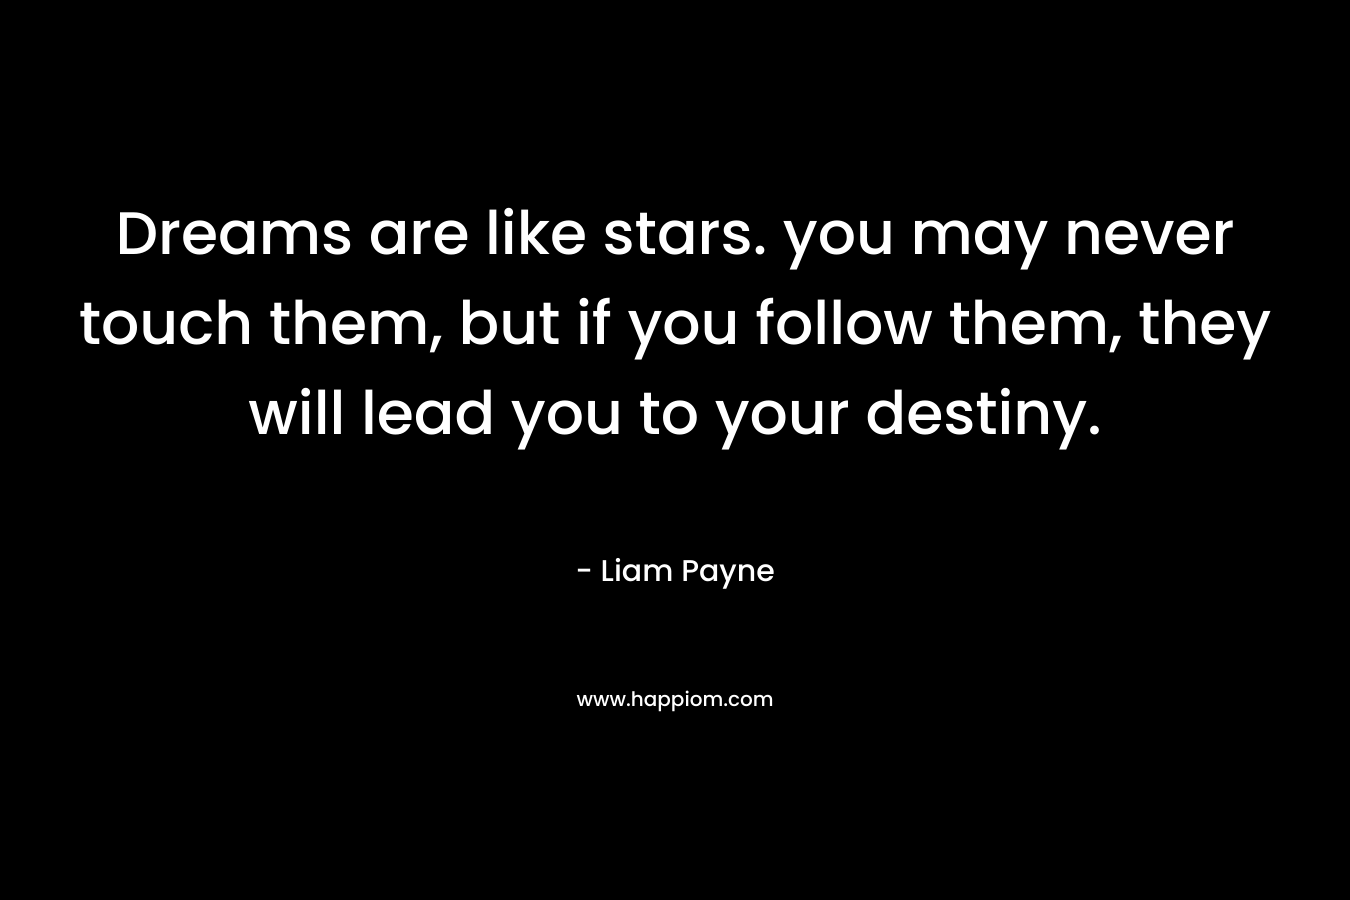 Dreams are like stars. you may never touch them, but if you follow them, they will lead you to your destiny.